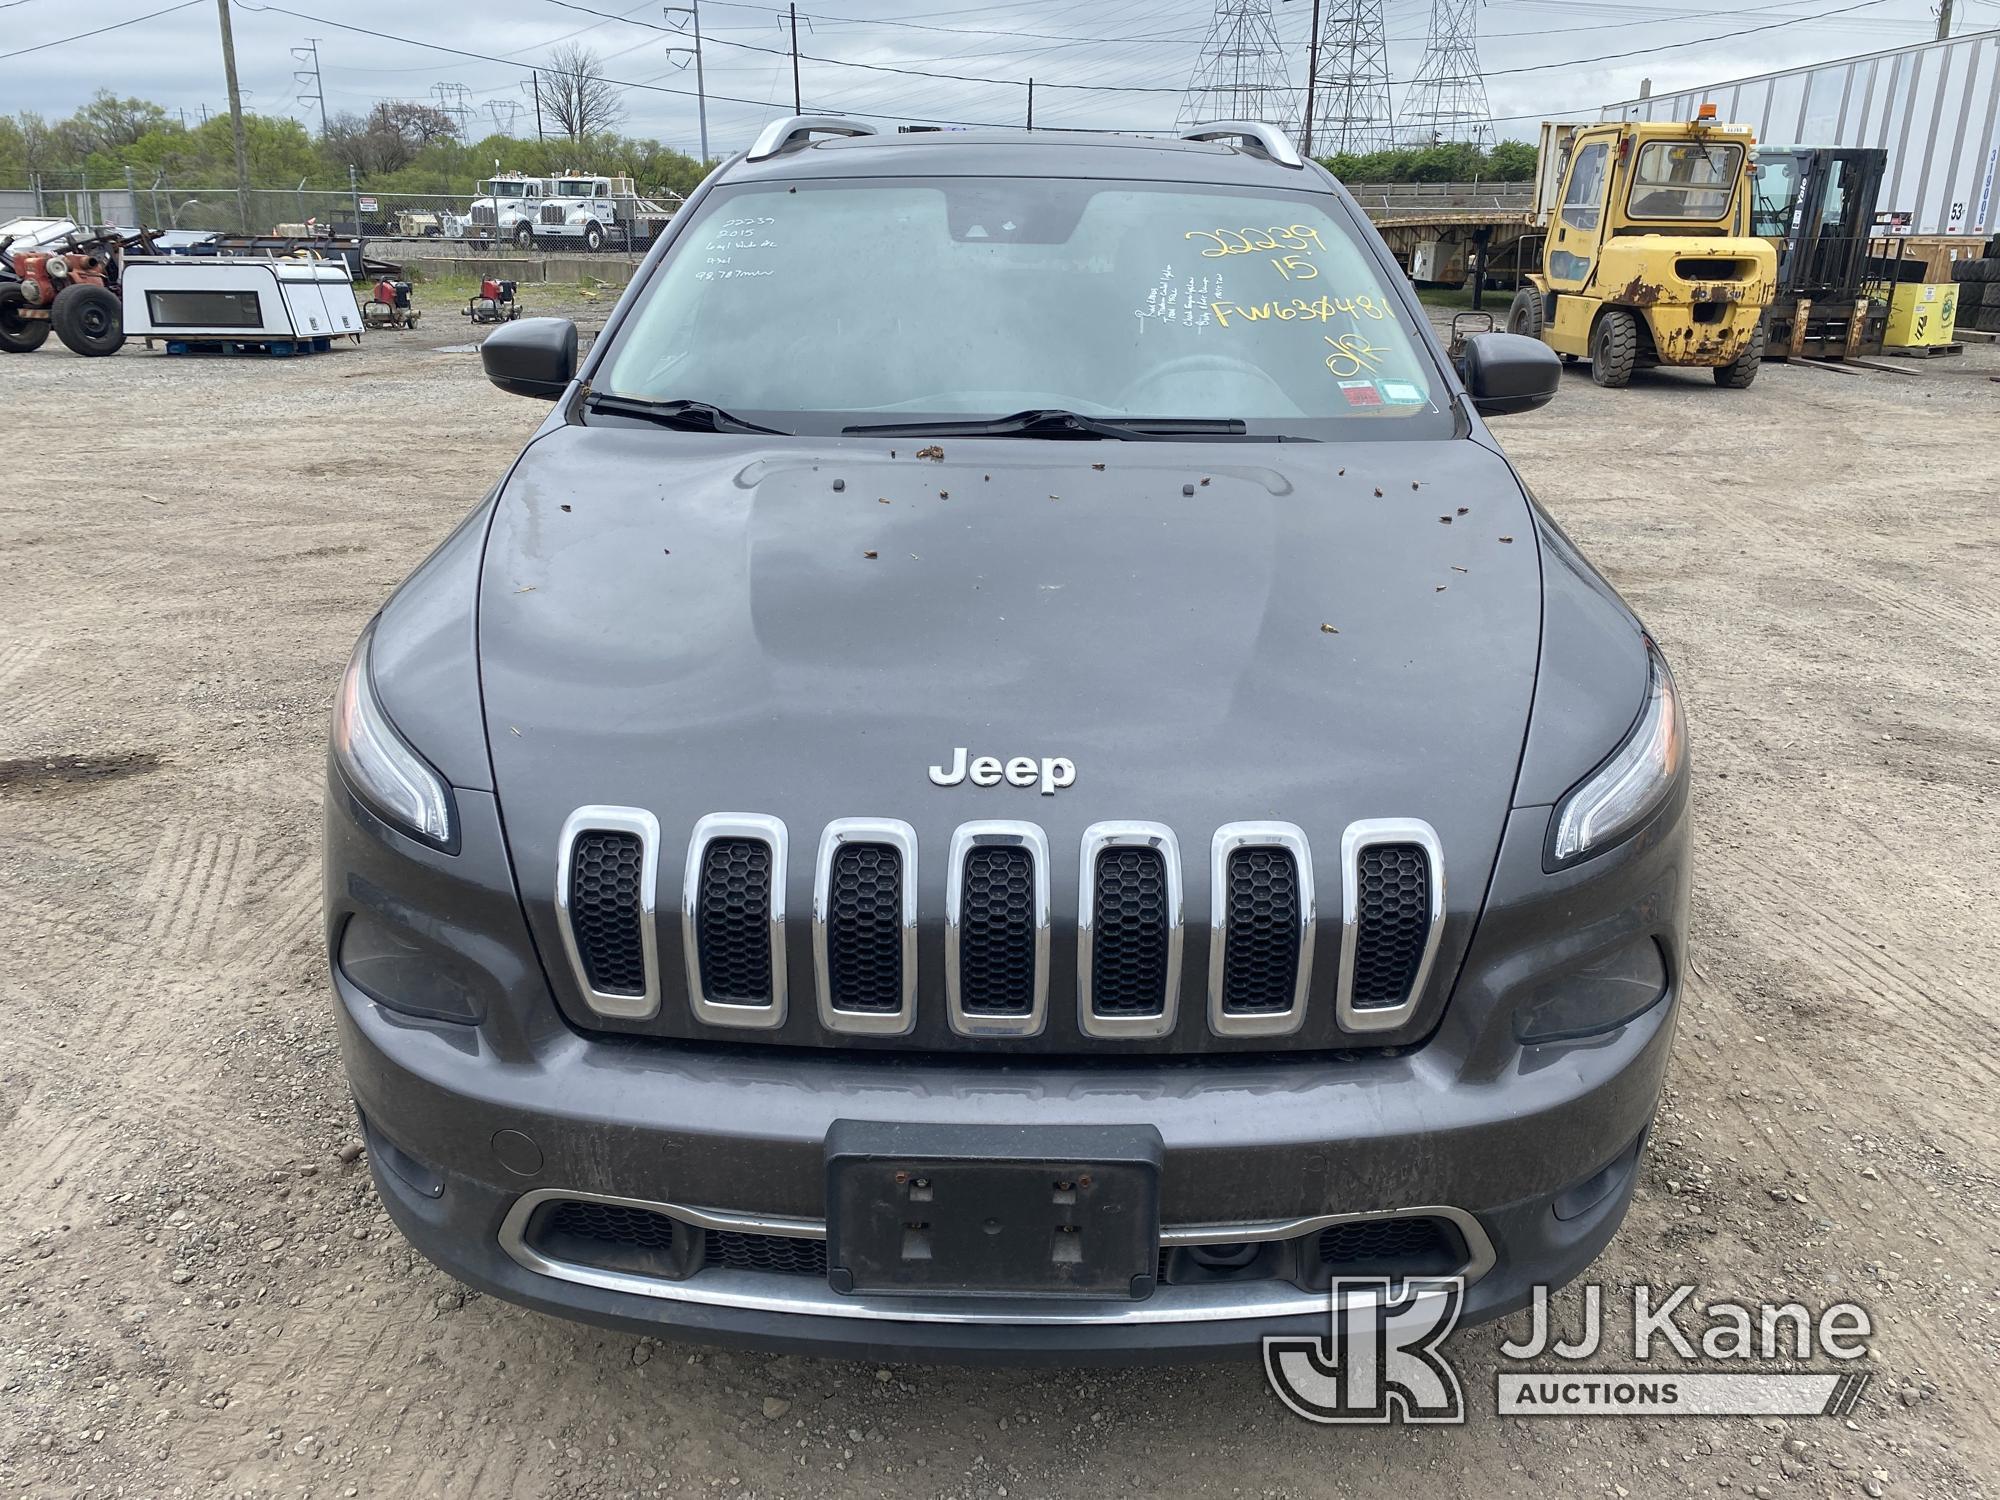 (Plymouth Meeting, PA) 2015 Jeep Cherokee 4x4 4-Door Sport Utility Vehicle Runs & Moves, Trans Issue